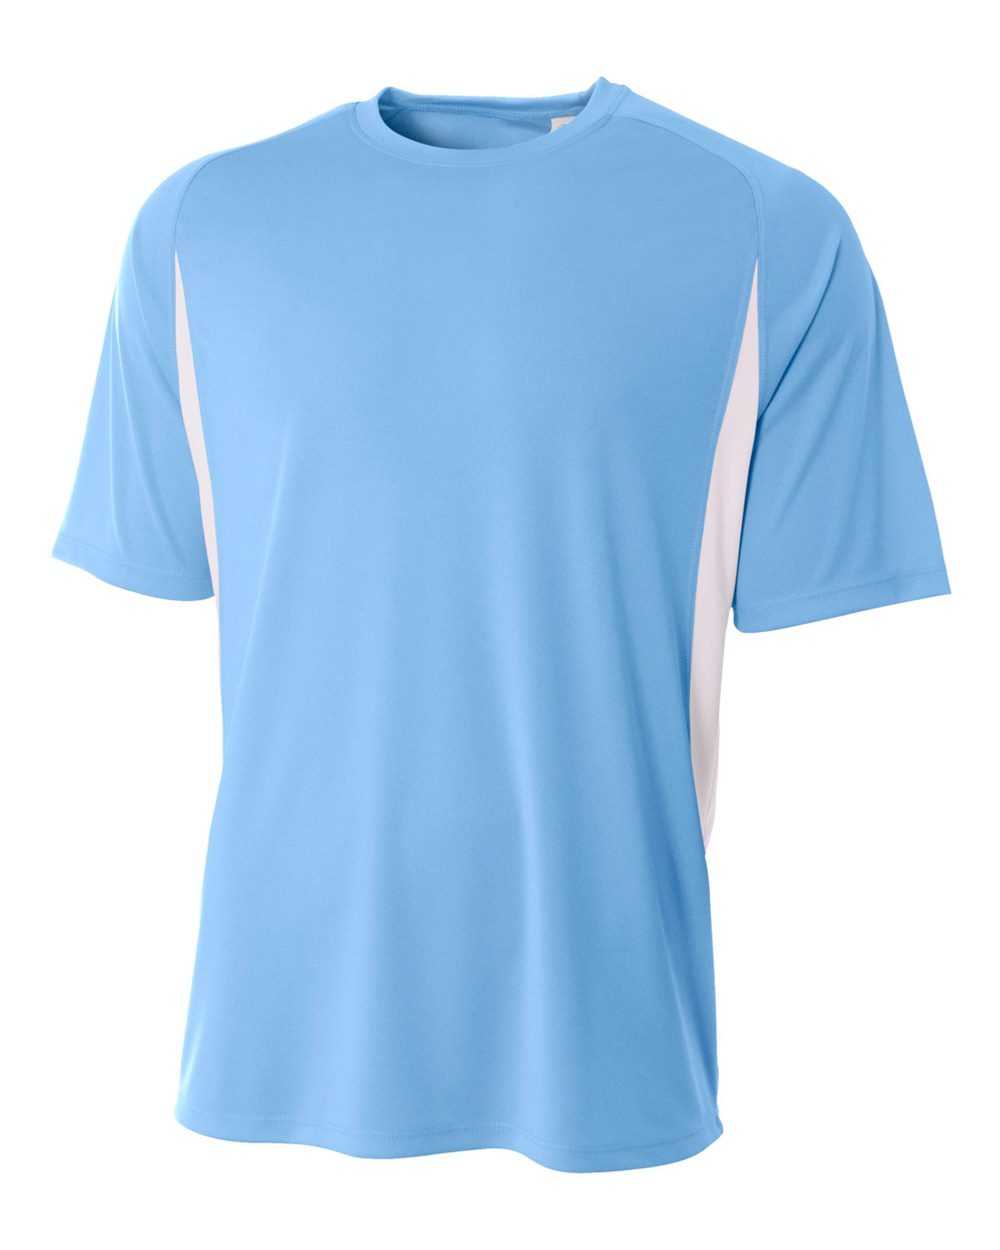 A4 NB3181 Youth Cooling Performance Color Block Short Sleeve Crew - Light Blue White - HIT a Double